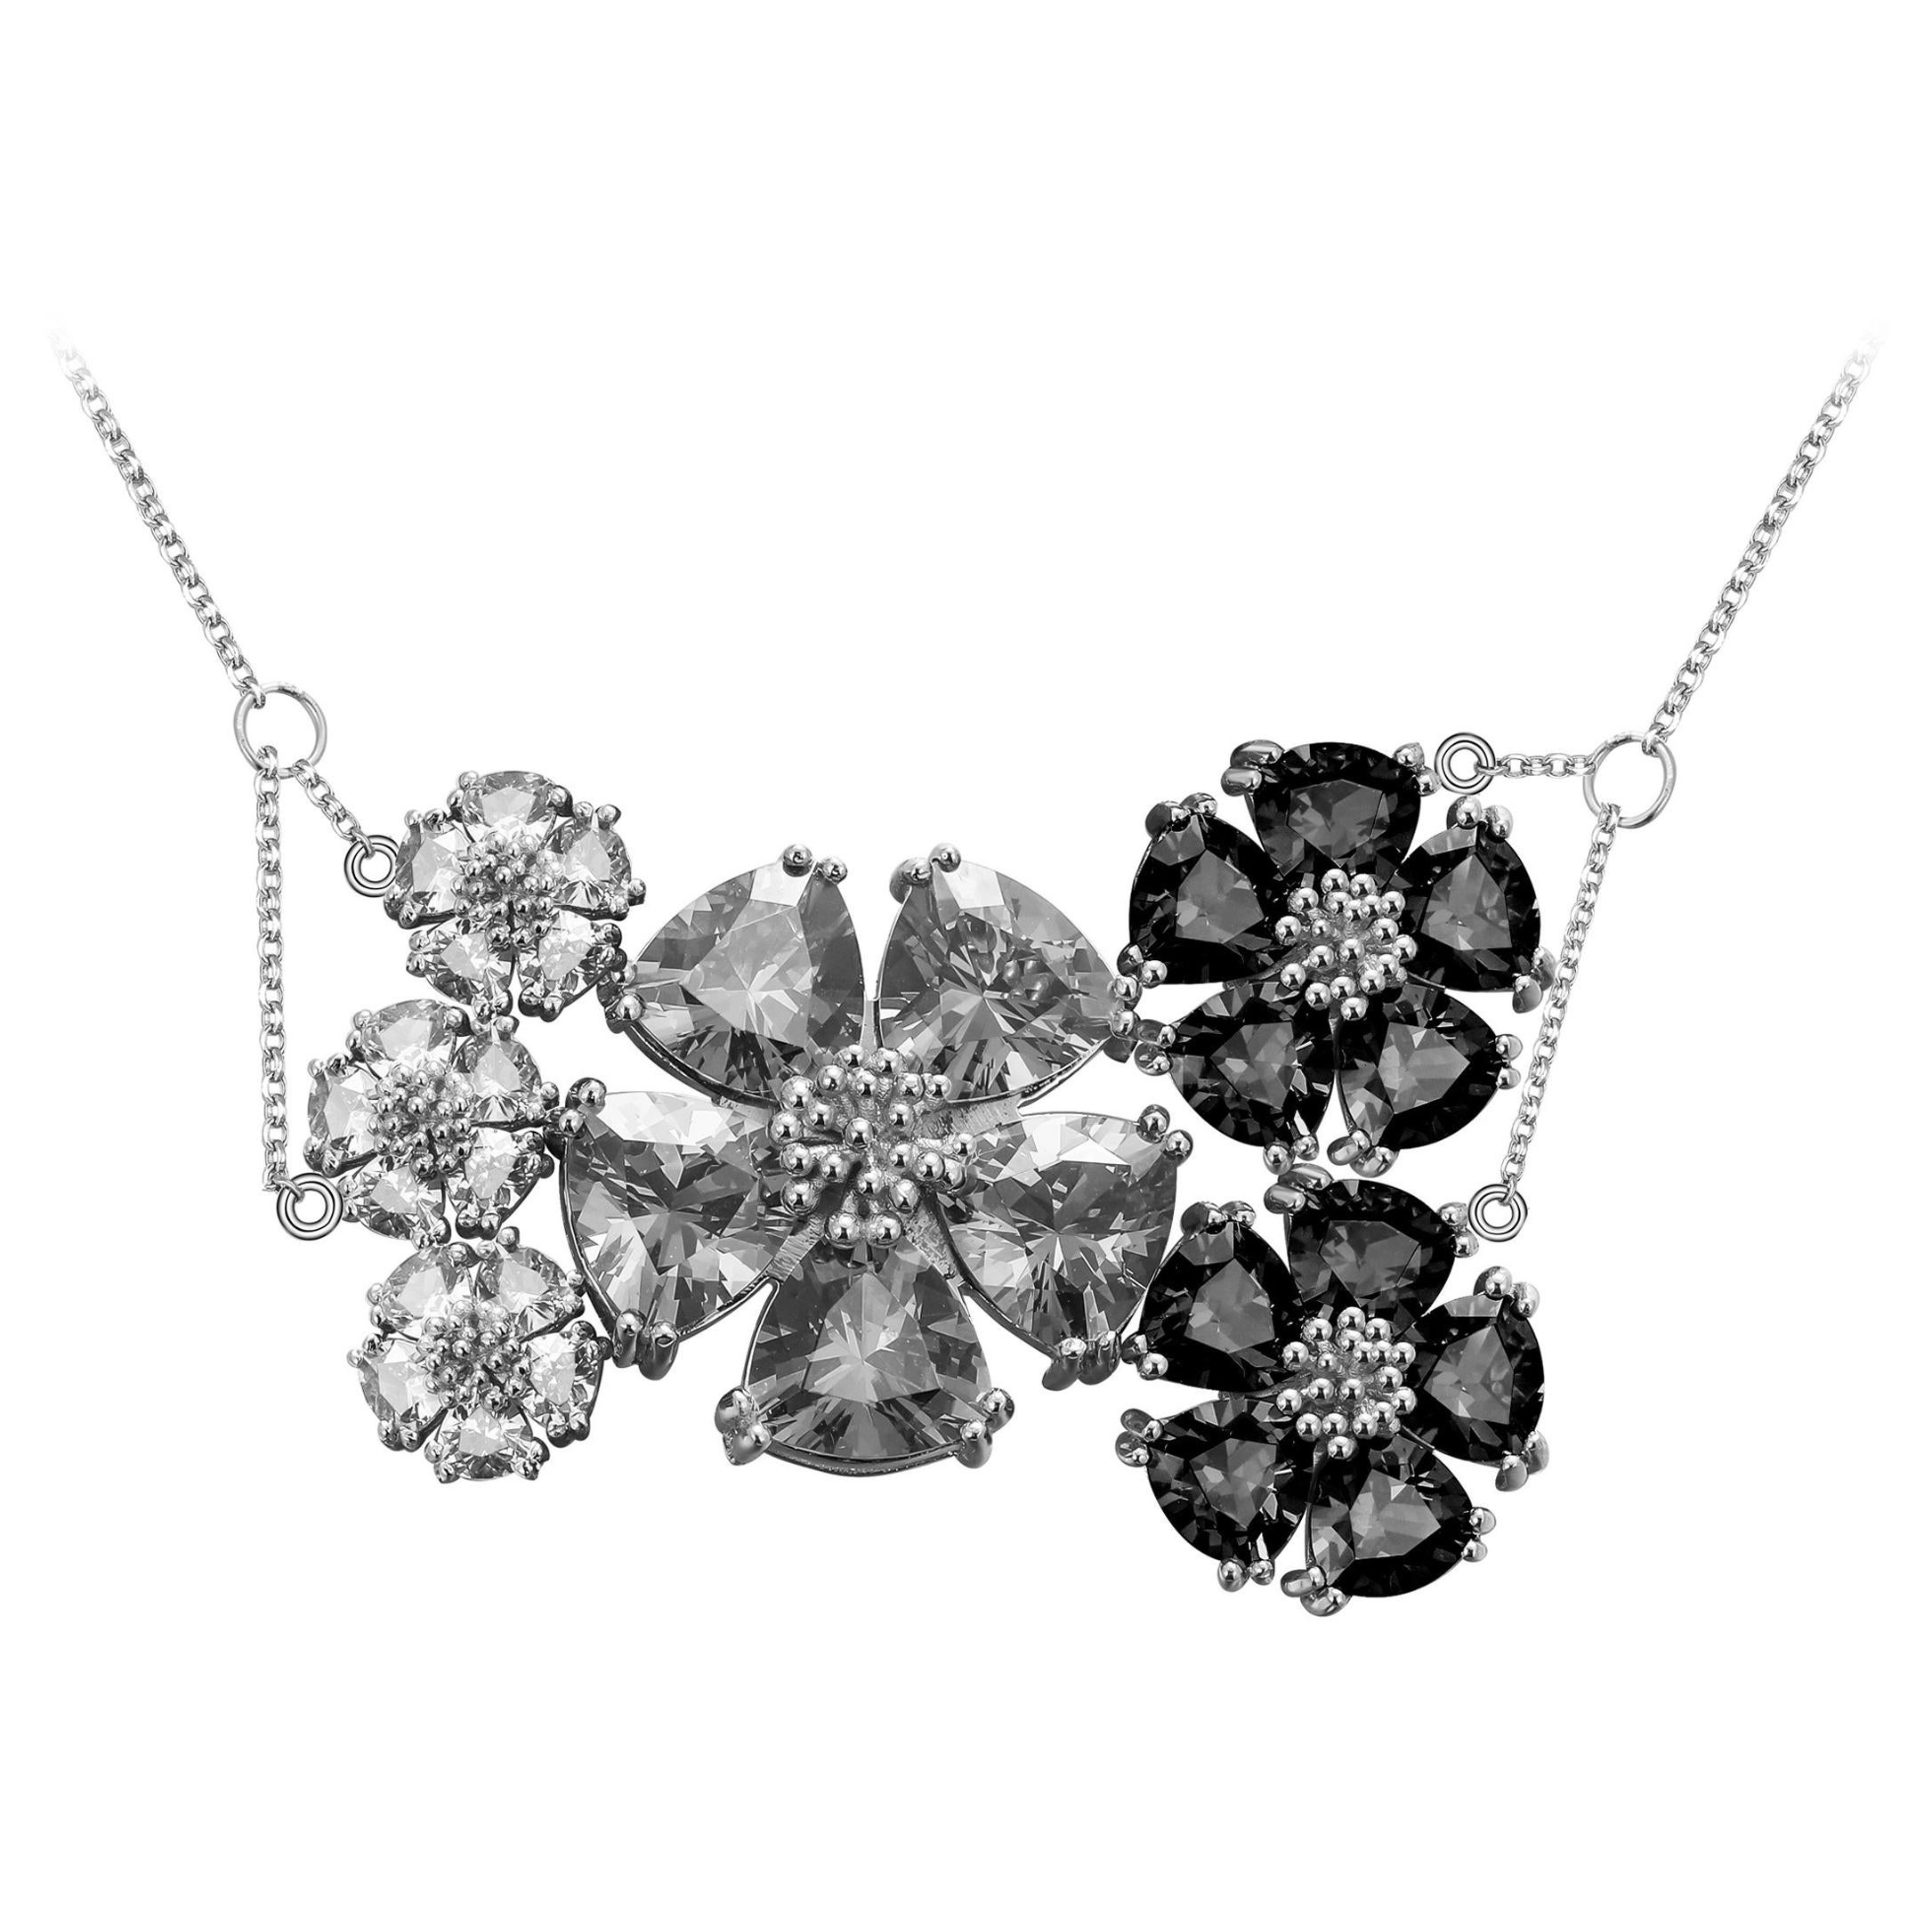 White Topaz, Gray and Black Spinel Blossom Renaissance Necklace For Sale